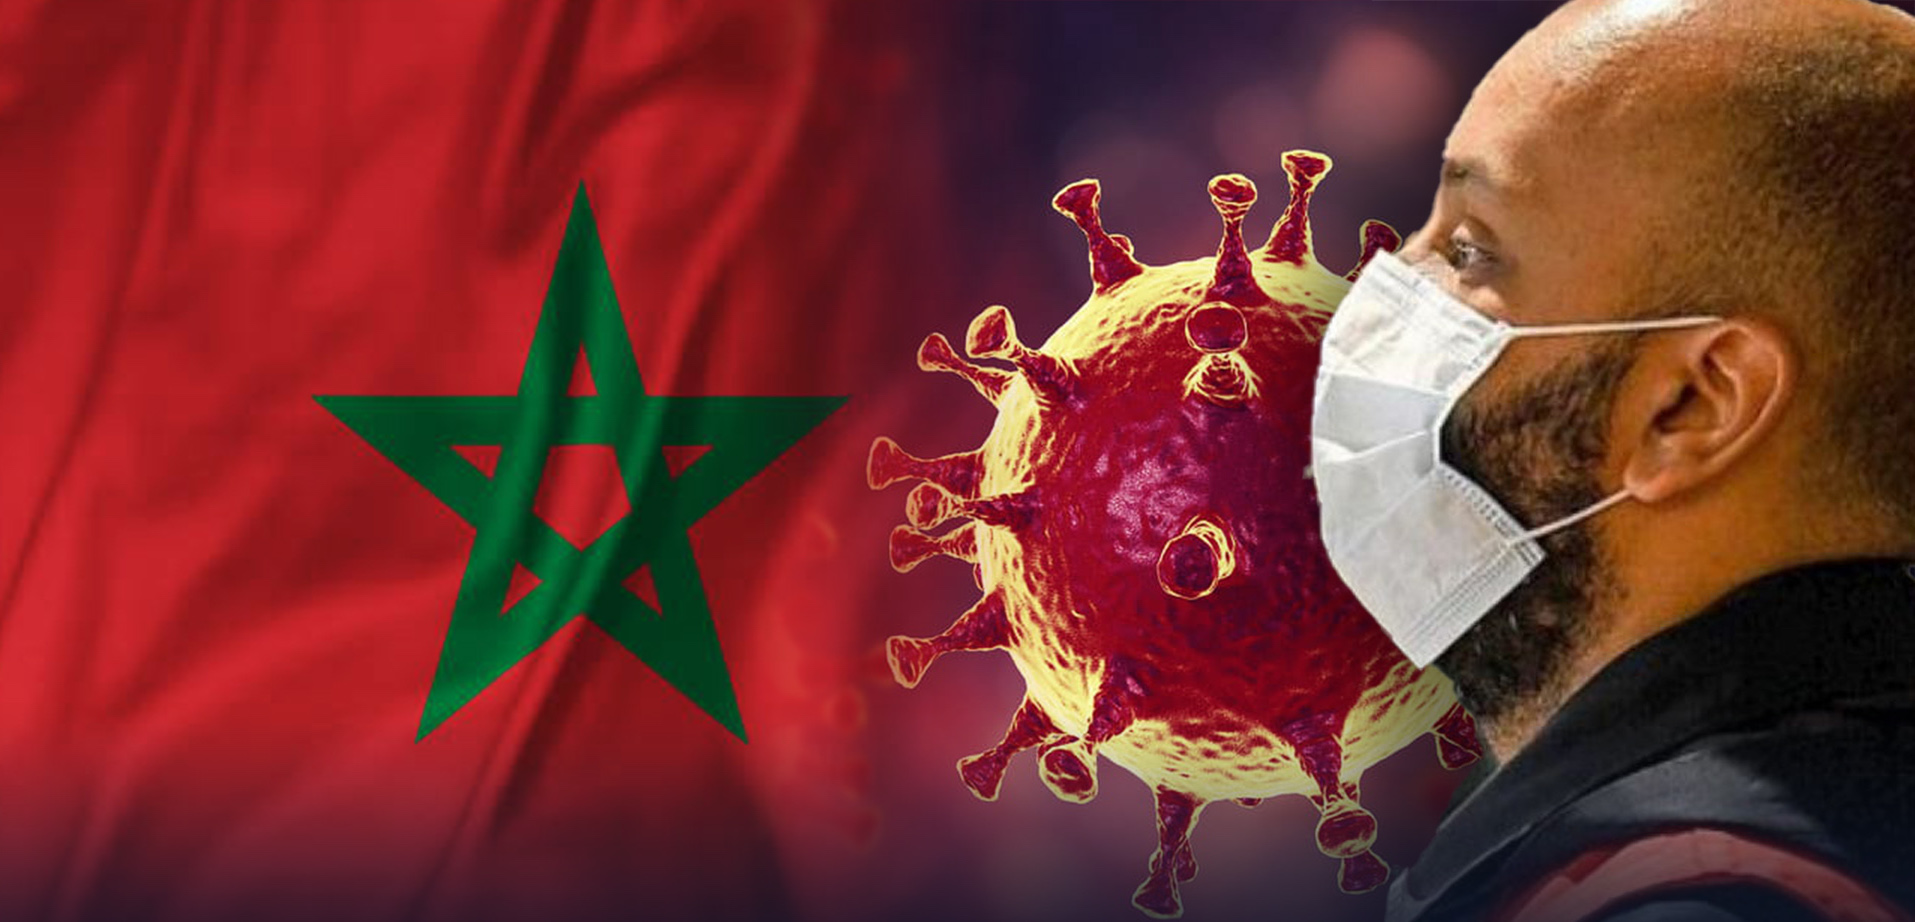 COVID-19: Morocco records 19 fatalities in 24 hours, highest death count since start of pandemic